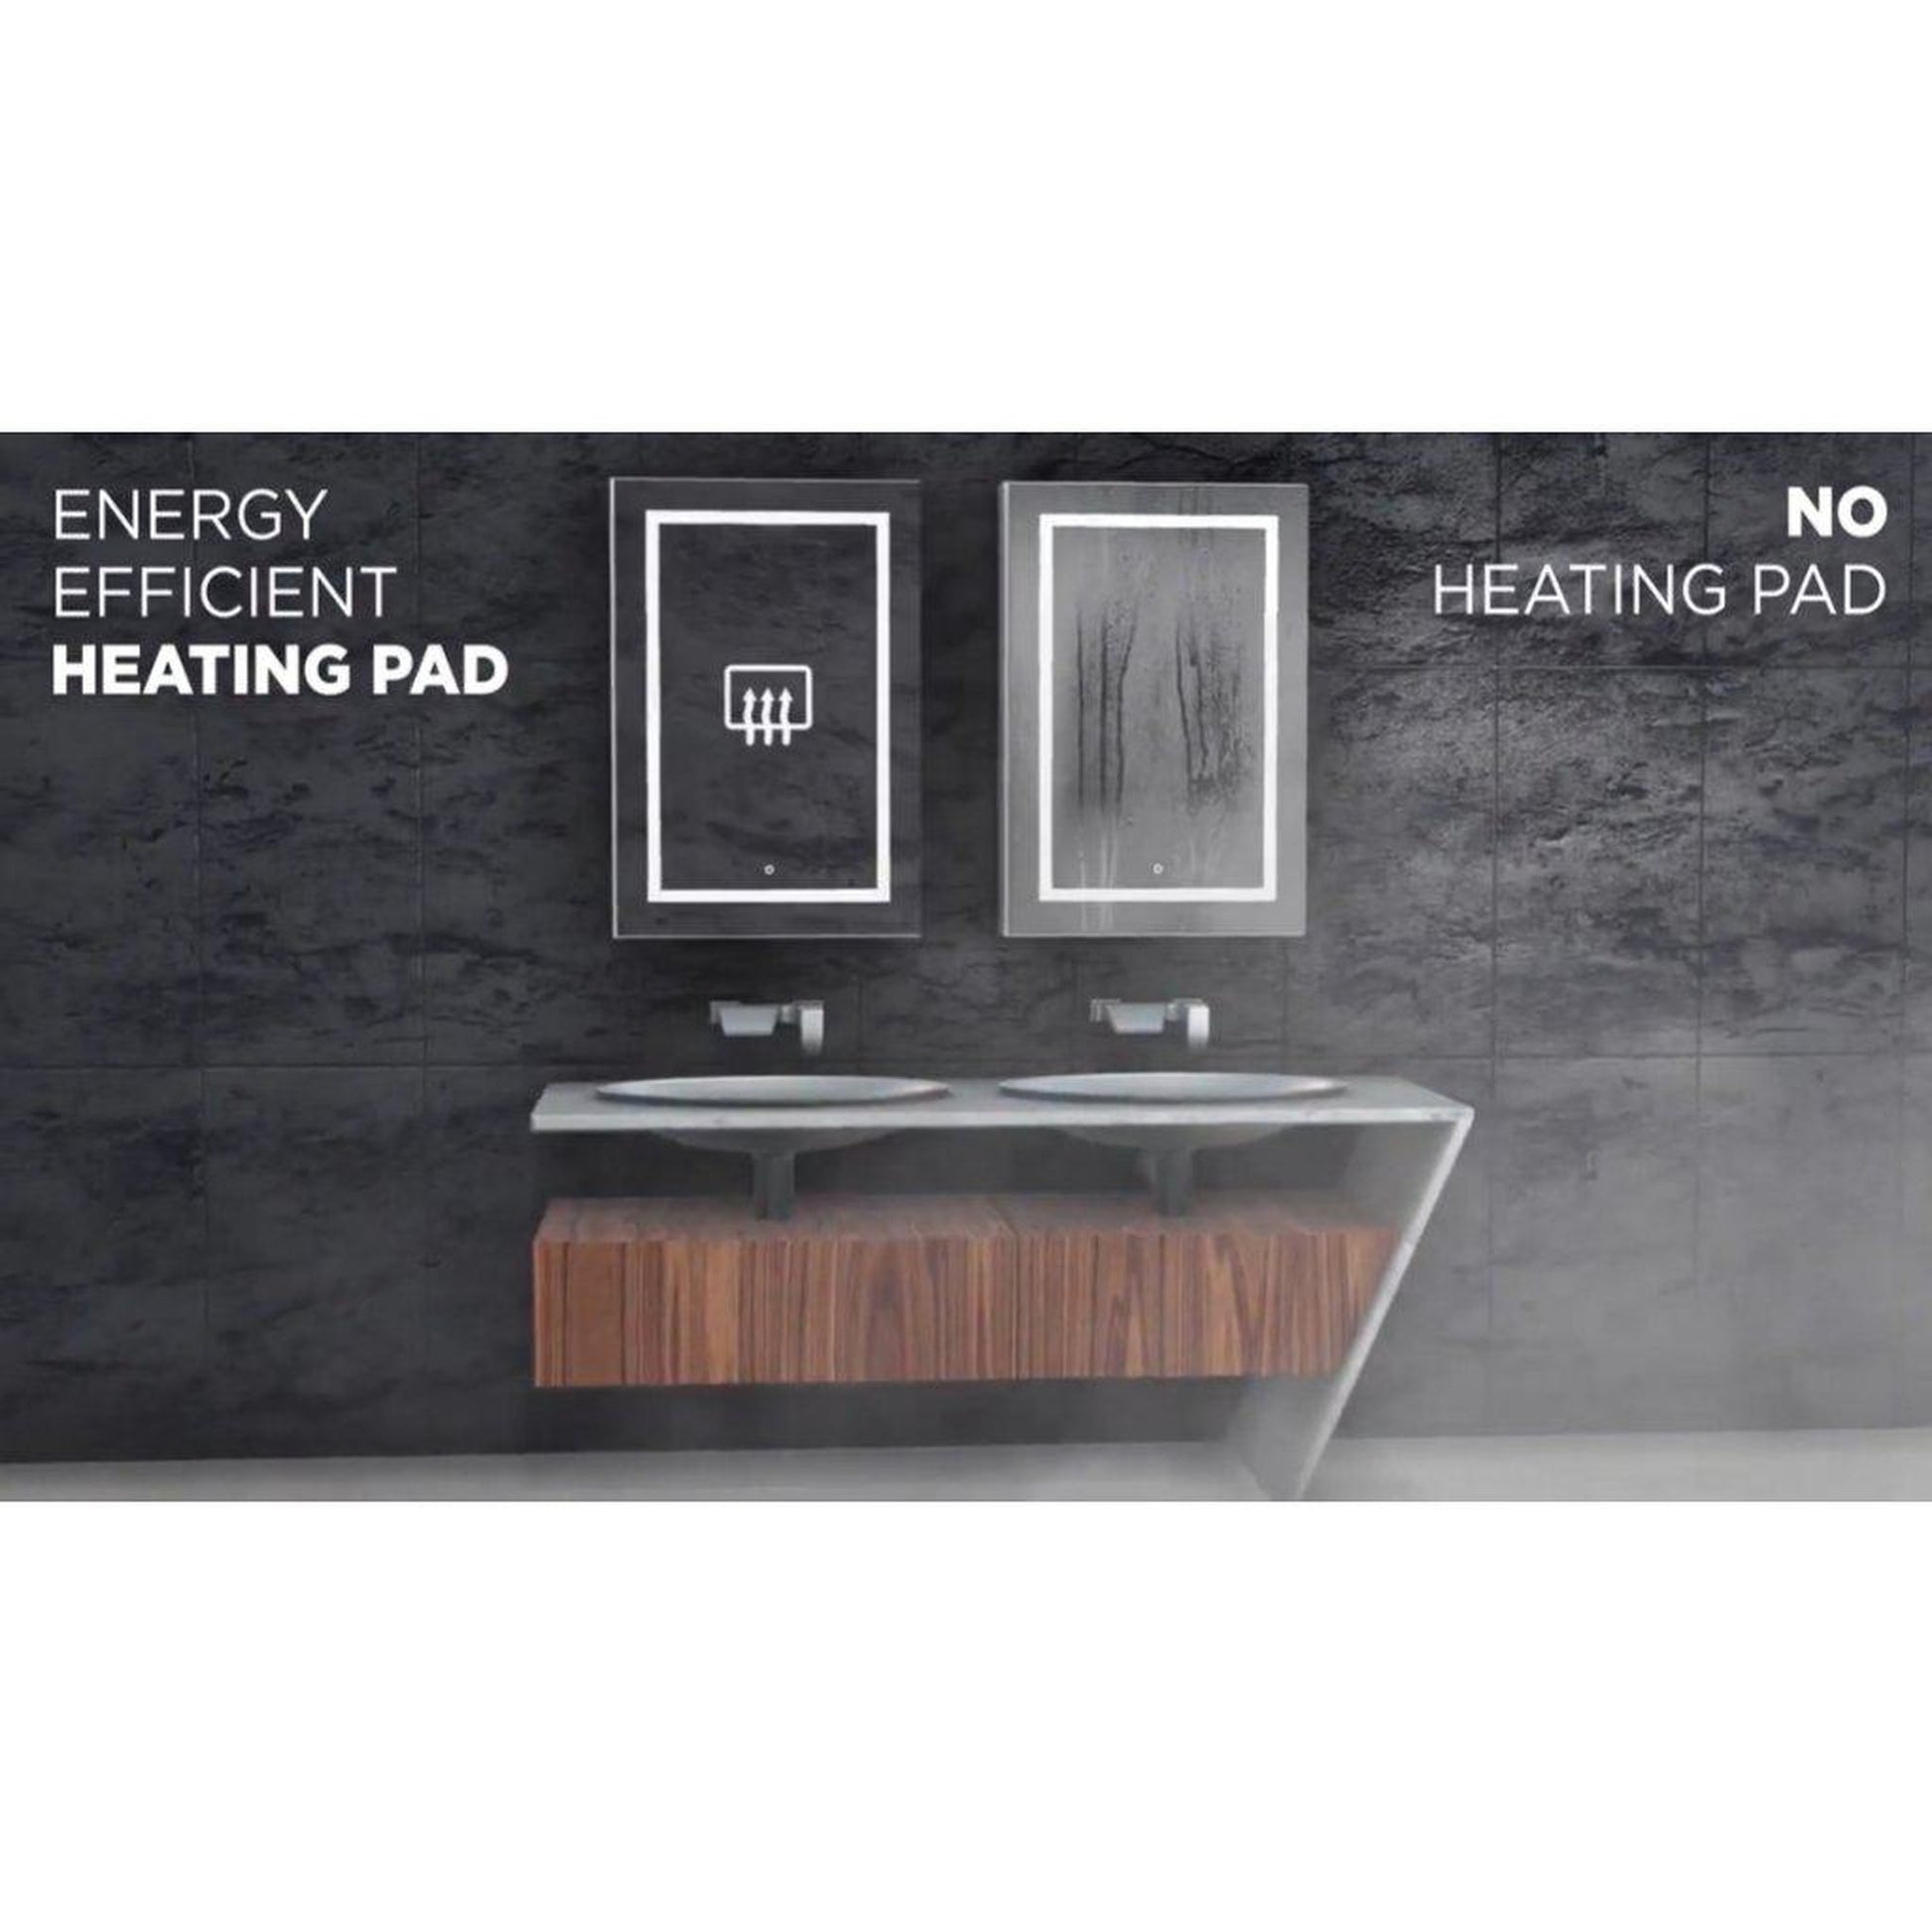 Krugg Reflections Mod 144" x 36" 5000K Long Modular Corner Wall-Mounted Silver-Backed LED Bathroom Vanity Mirror With Built-in Defogger and Dimmer